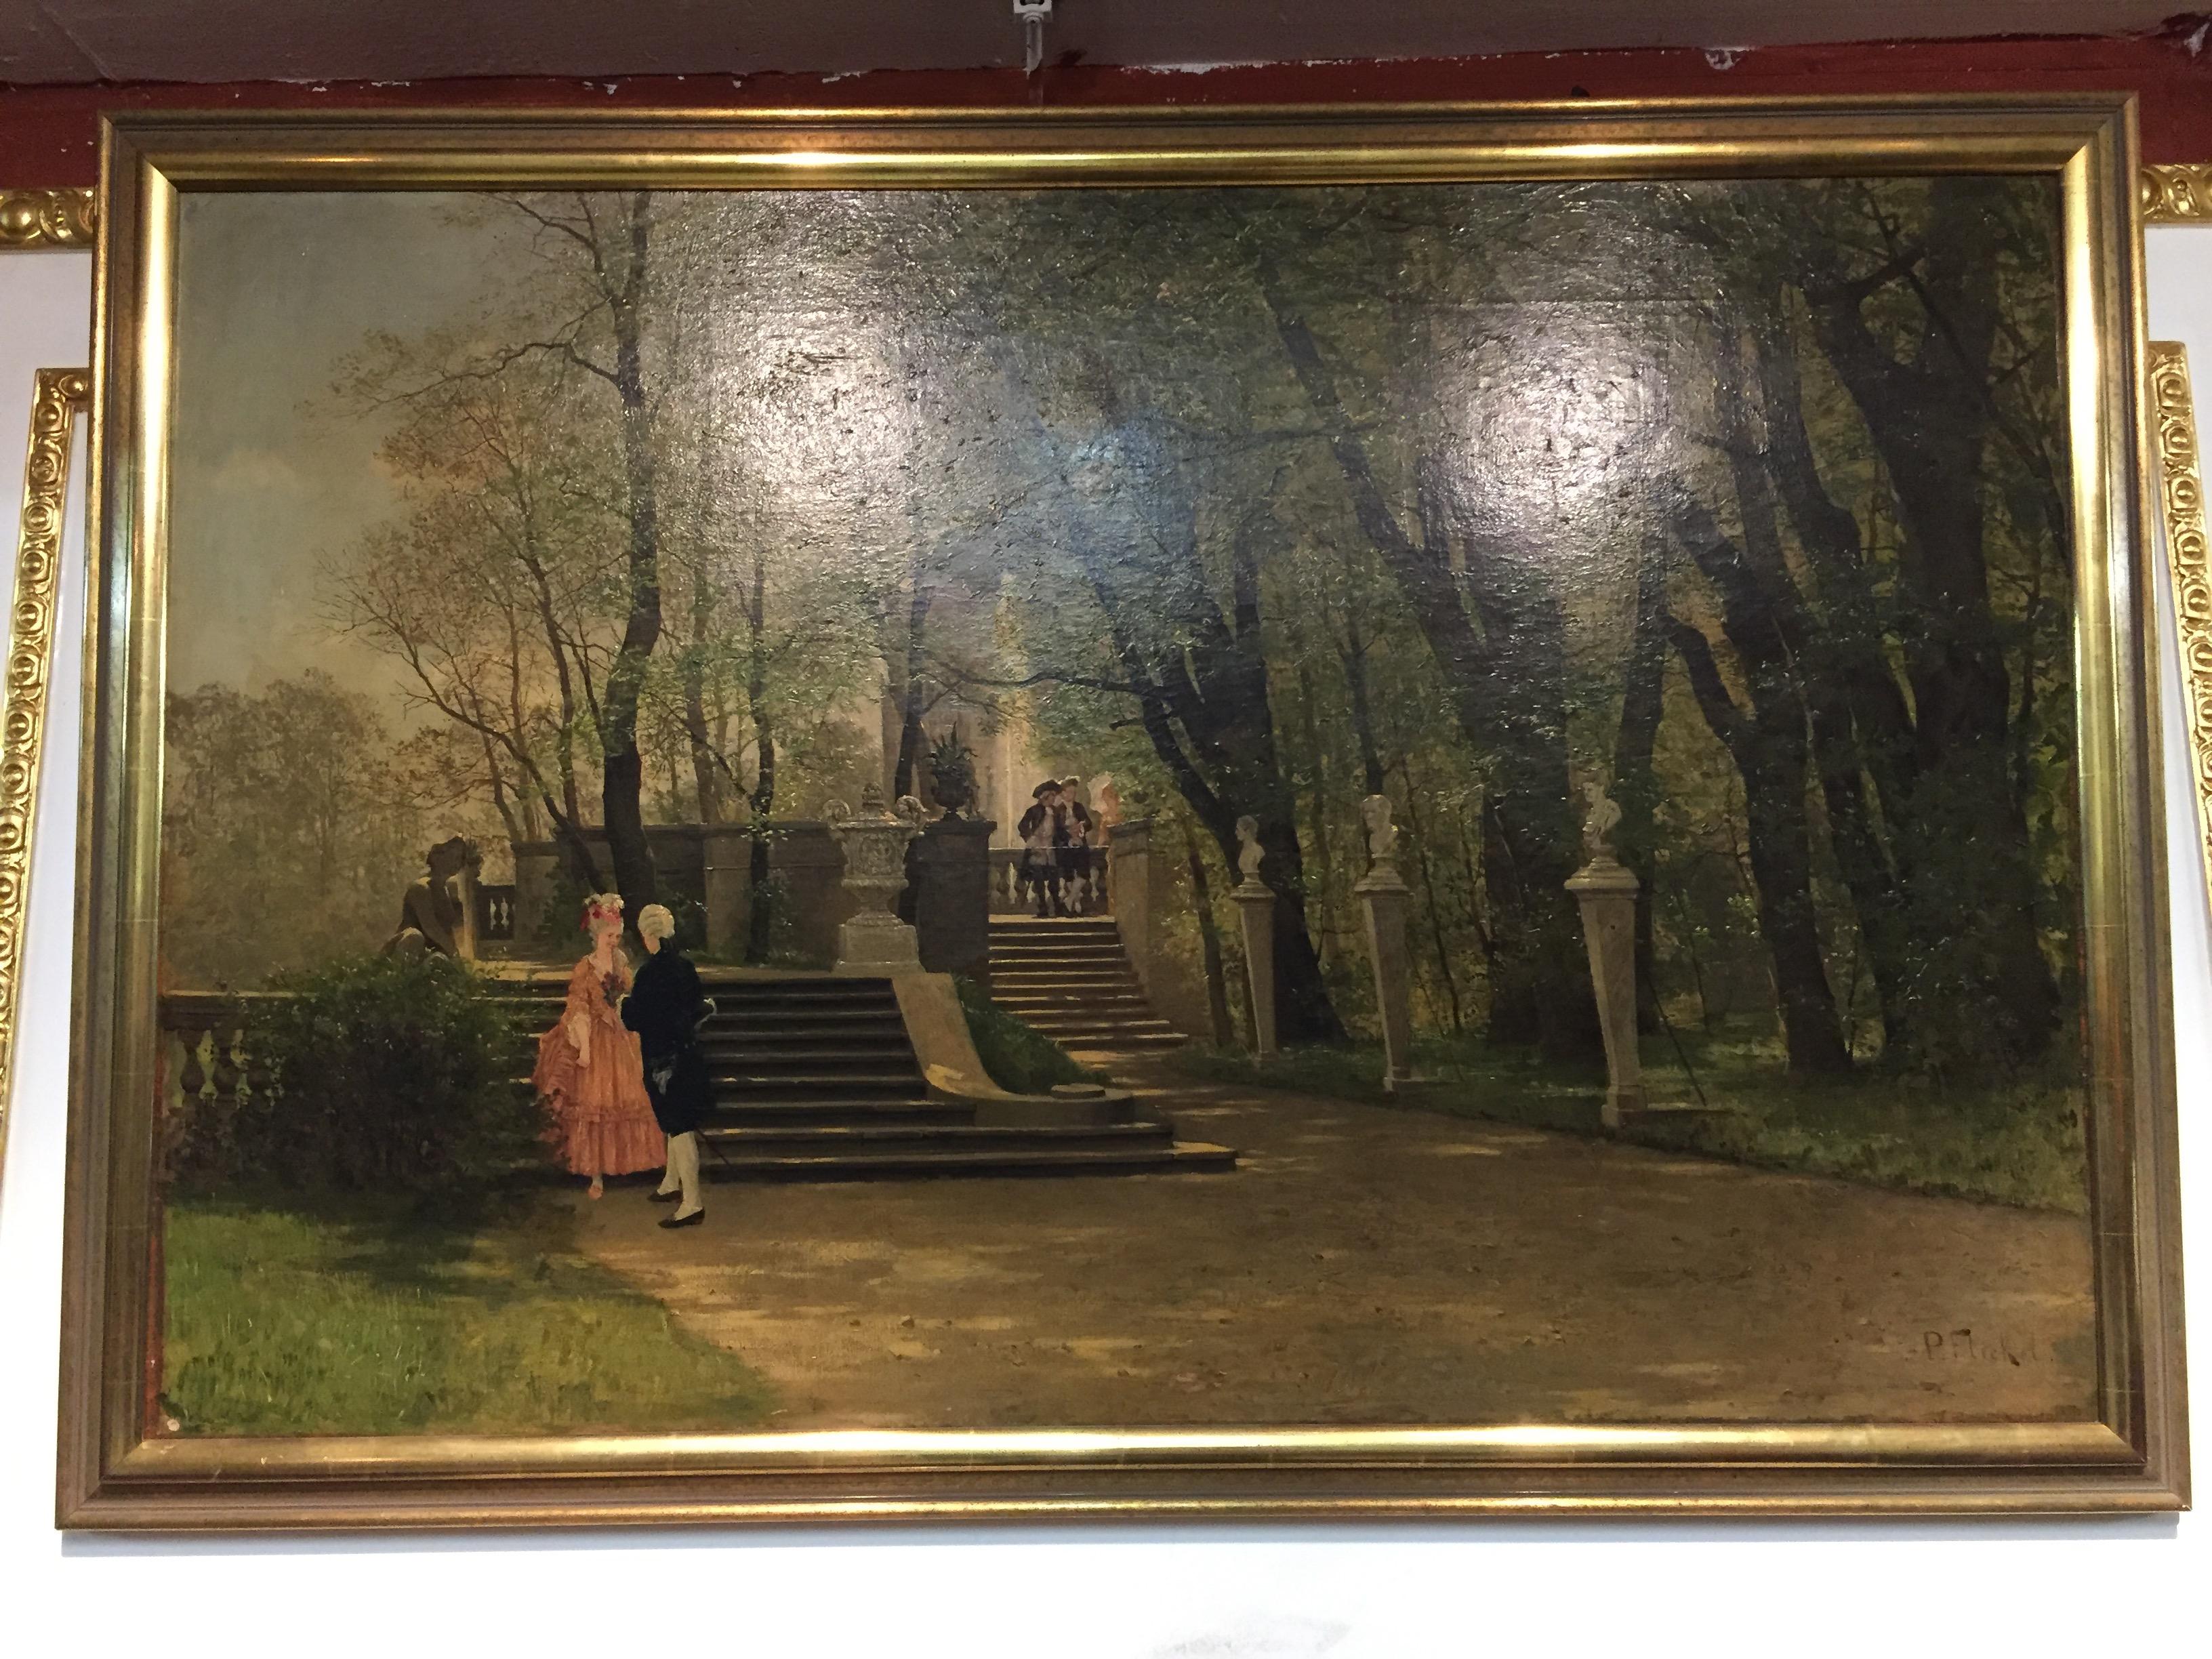 Hand-Painted Oil Painting by P. F. Flickel in the Castle Garden